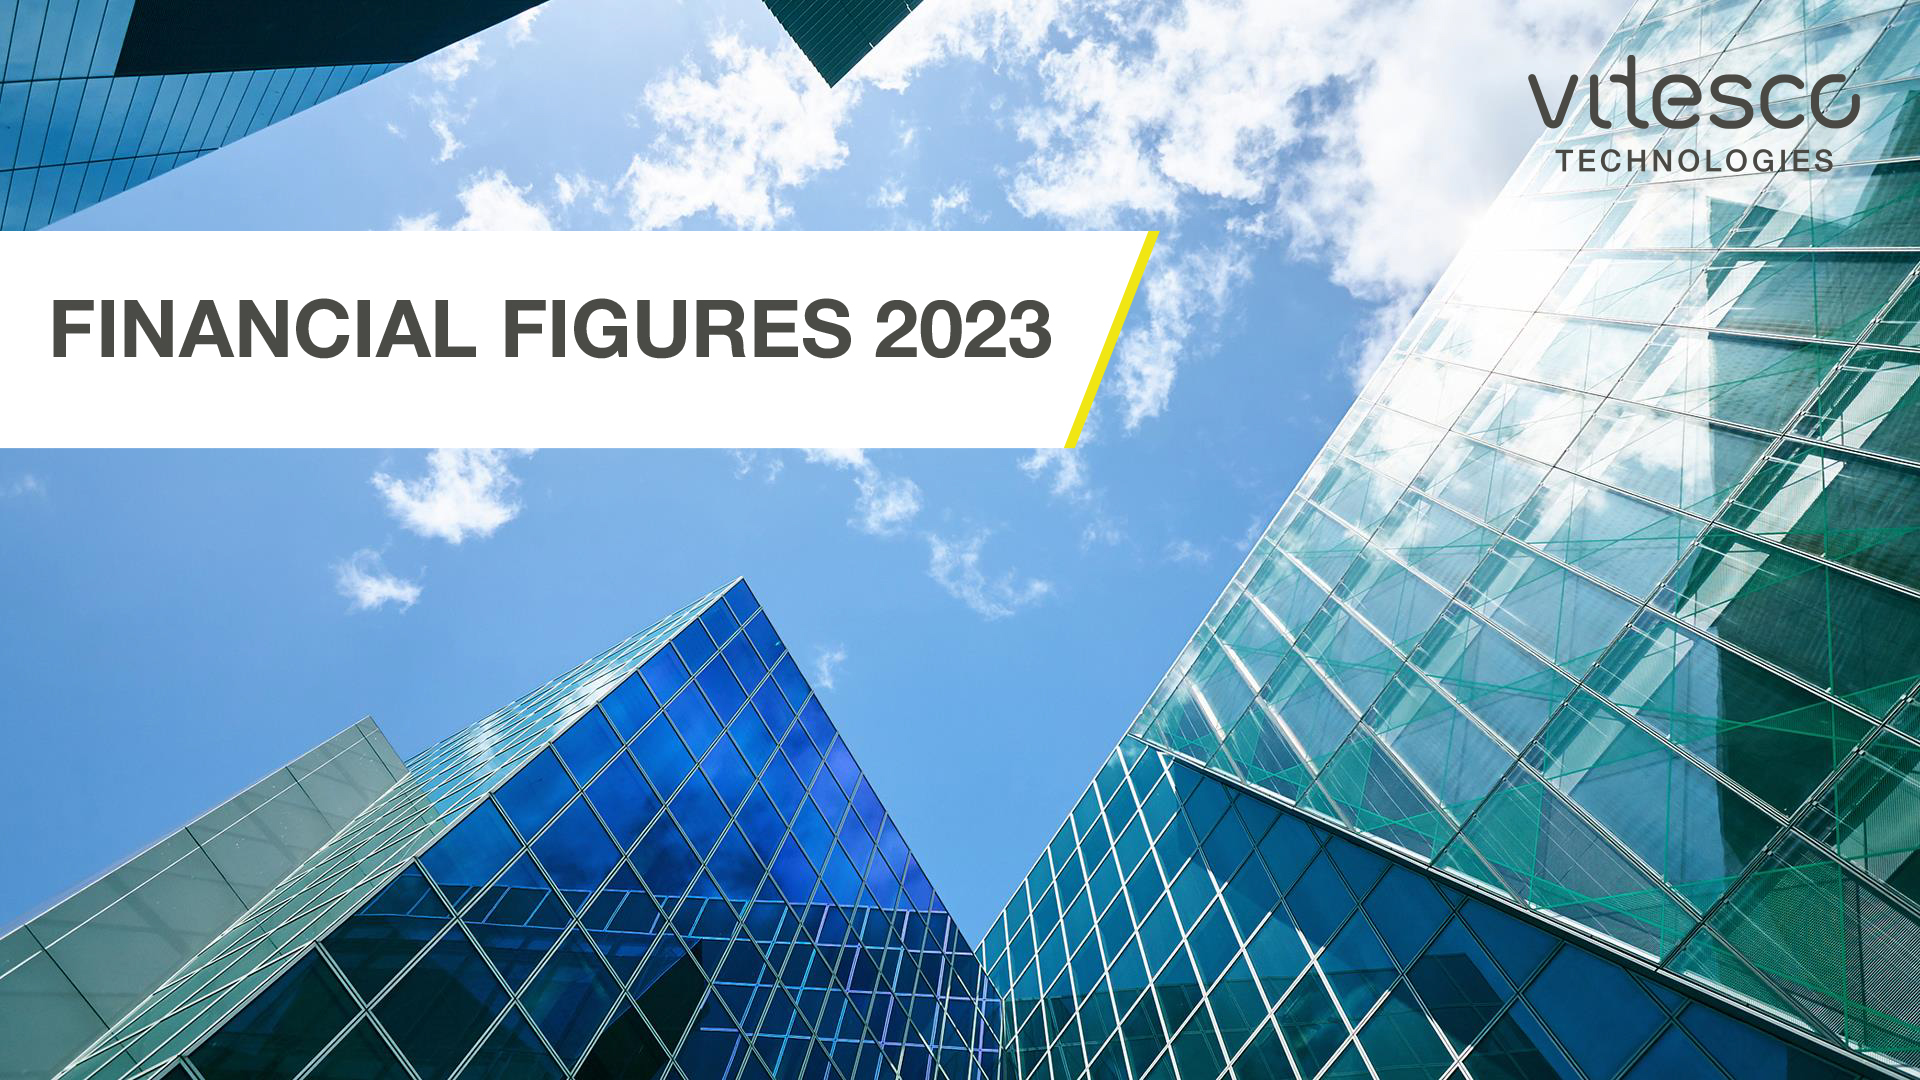 Fiscal year 2023: Profitability and cash flow exceeded expectations